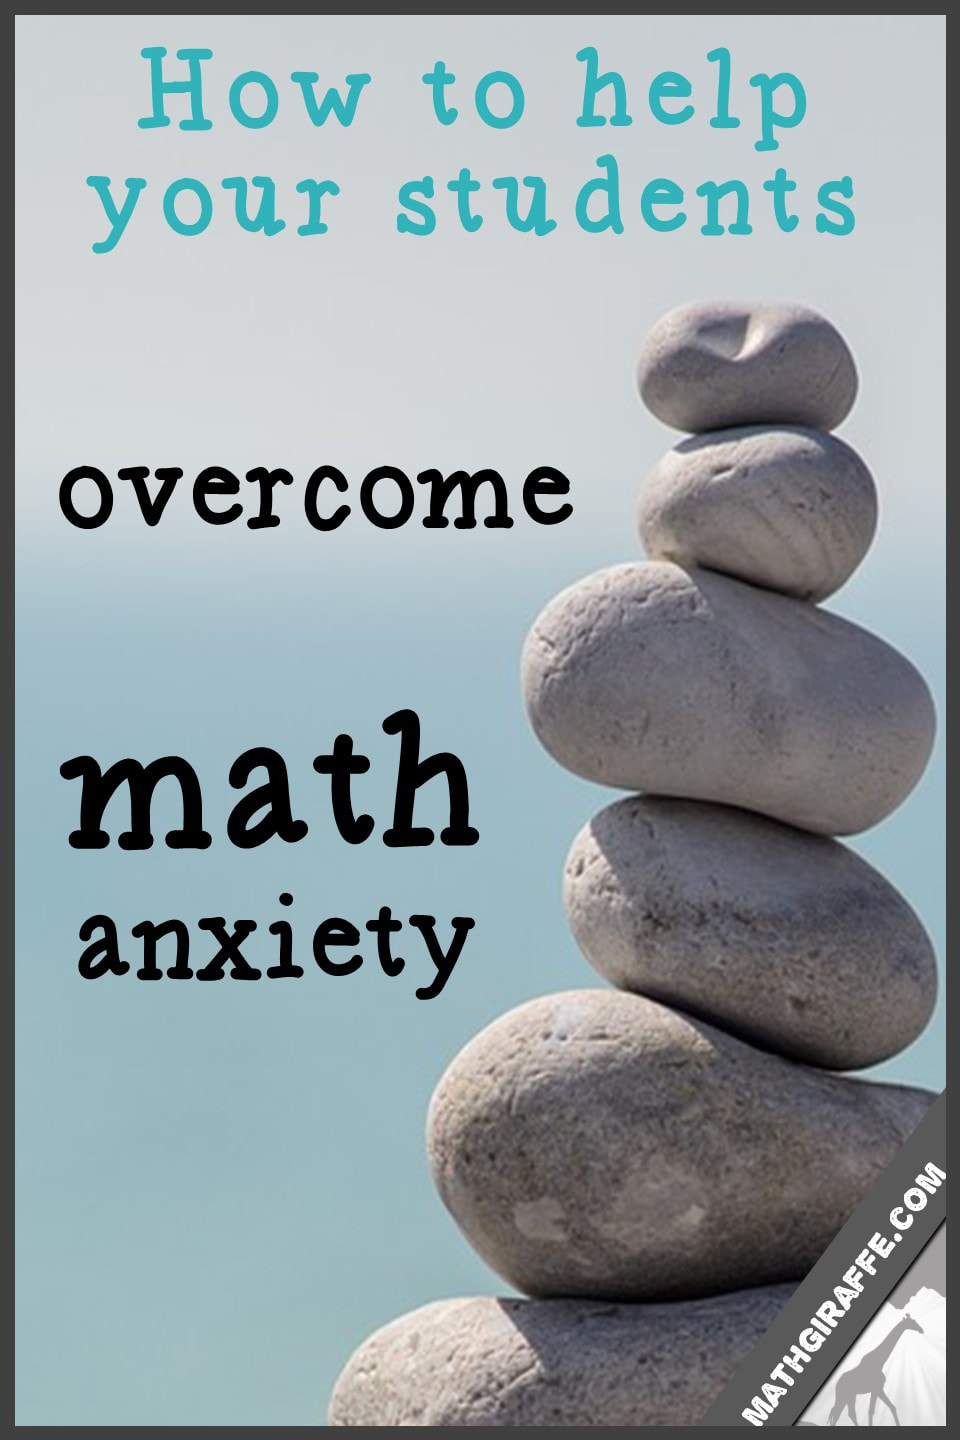 overcoming math anxiety - how to help your students relax and learn